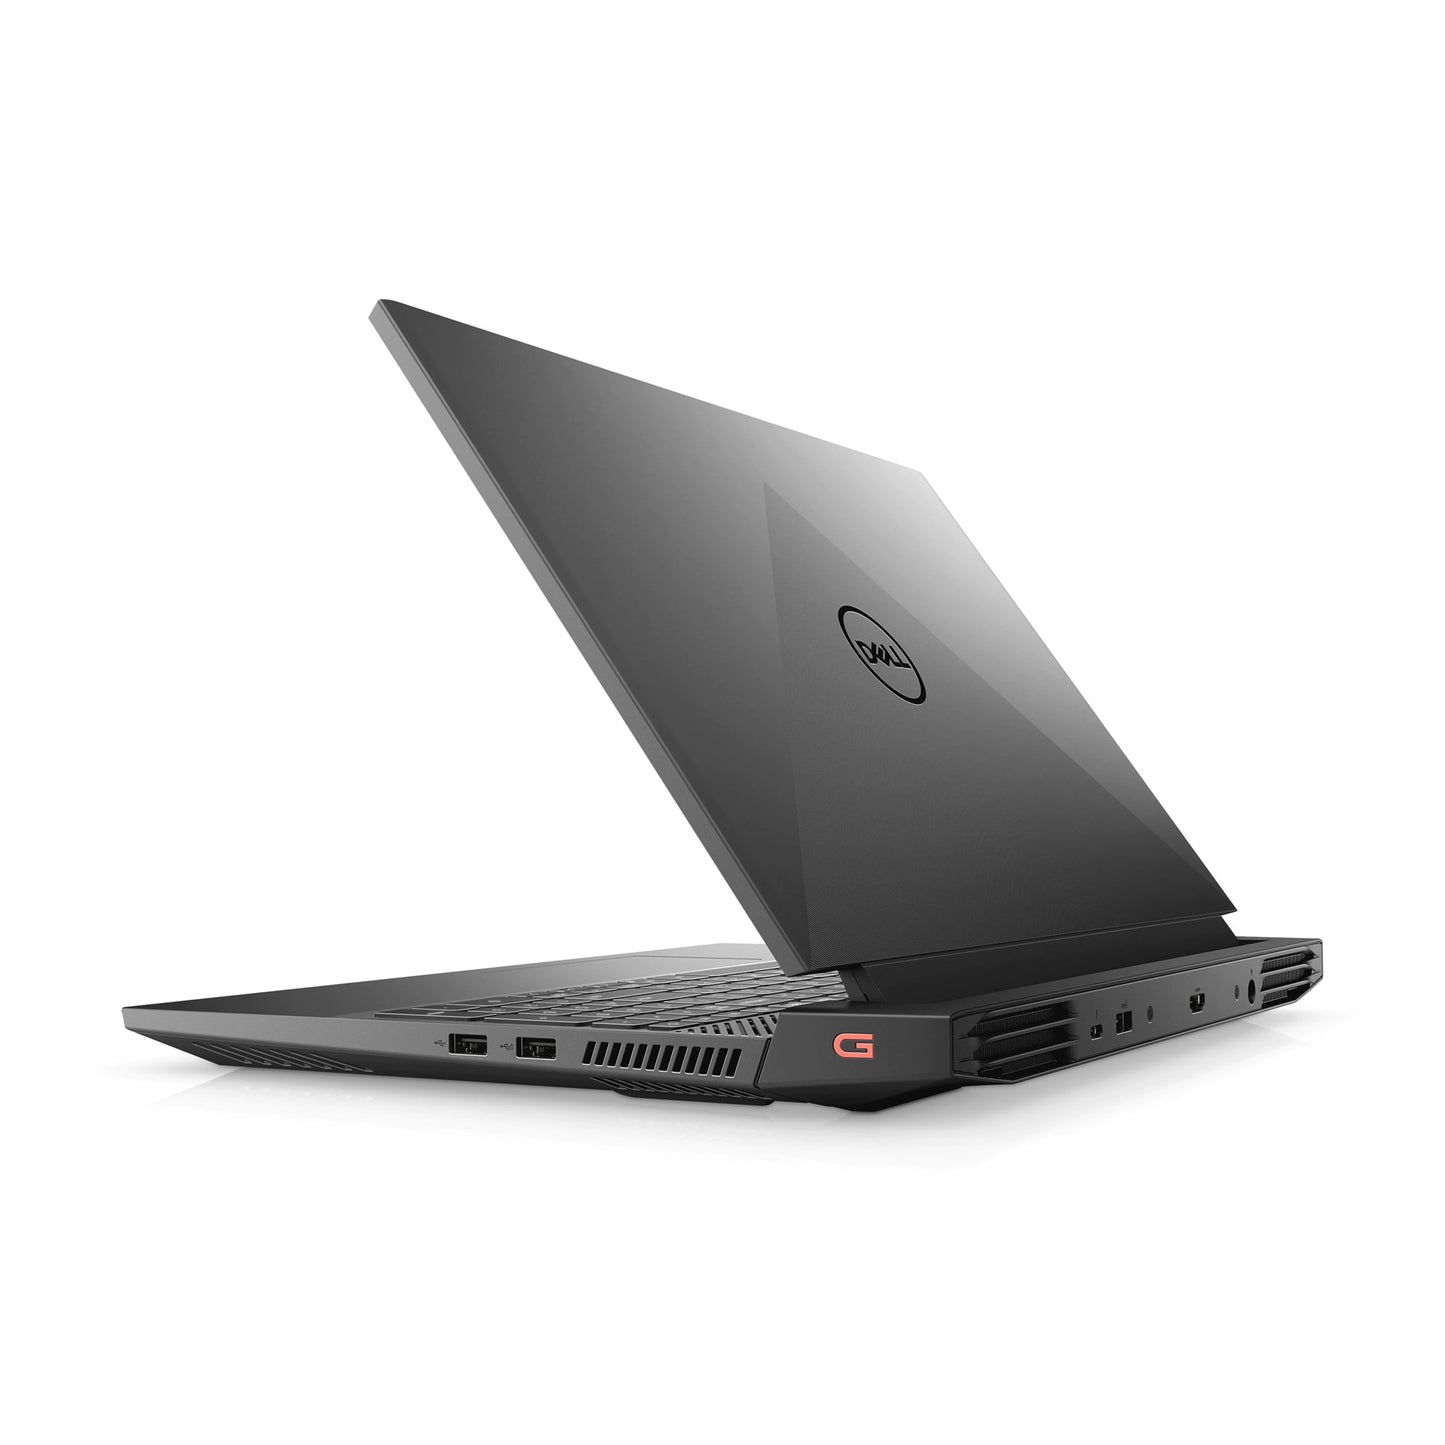 Dell G15 5510 RTX 3050 Gaming Laptop Offers (Brand New) Gaming laptop, Graphic Design laptop, best laptop for gaming, Best laptop for graphic design, computer for sale Lebanon, laptop for video editing in Lebanon, laptop for sale Lebanon, Best graphic design laptop,	Best video editing laptop, Best programming laptop, laptop for sale in Lebanon, laptops for sale in Lebanon, laptop for sale in Lebanon, buy computer Lebanon, buy laptop Lebanon.